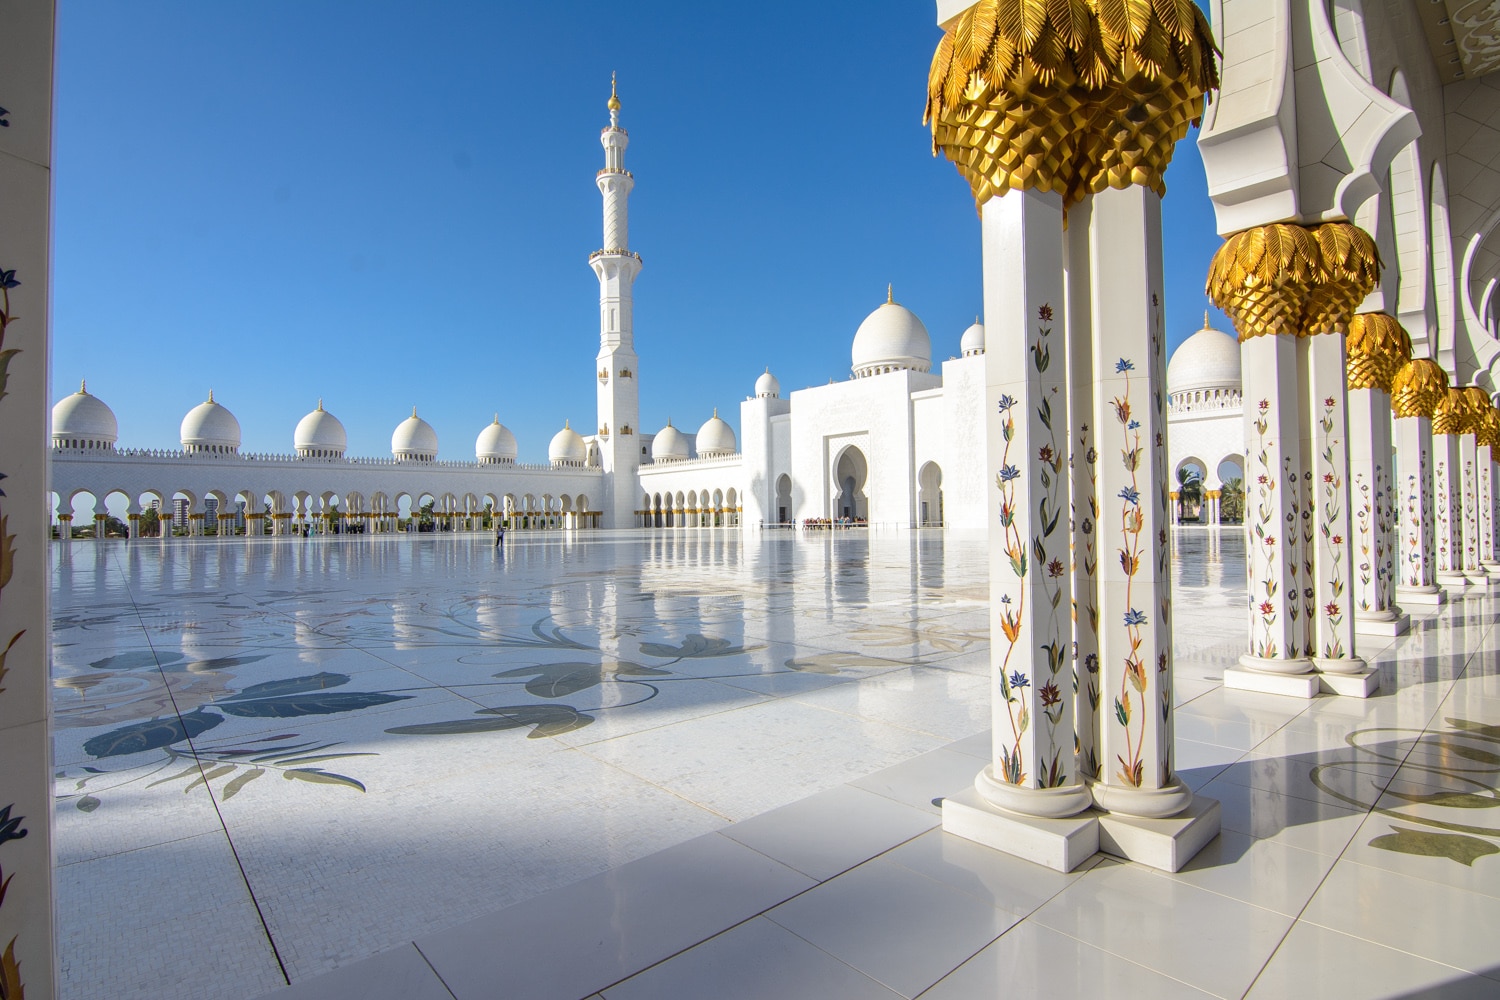 How to Visit Abu Dhabi's Grand Mosque - The Road Les Traveled